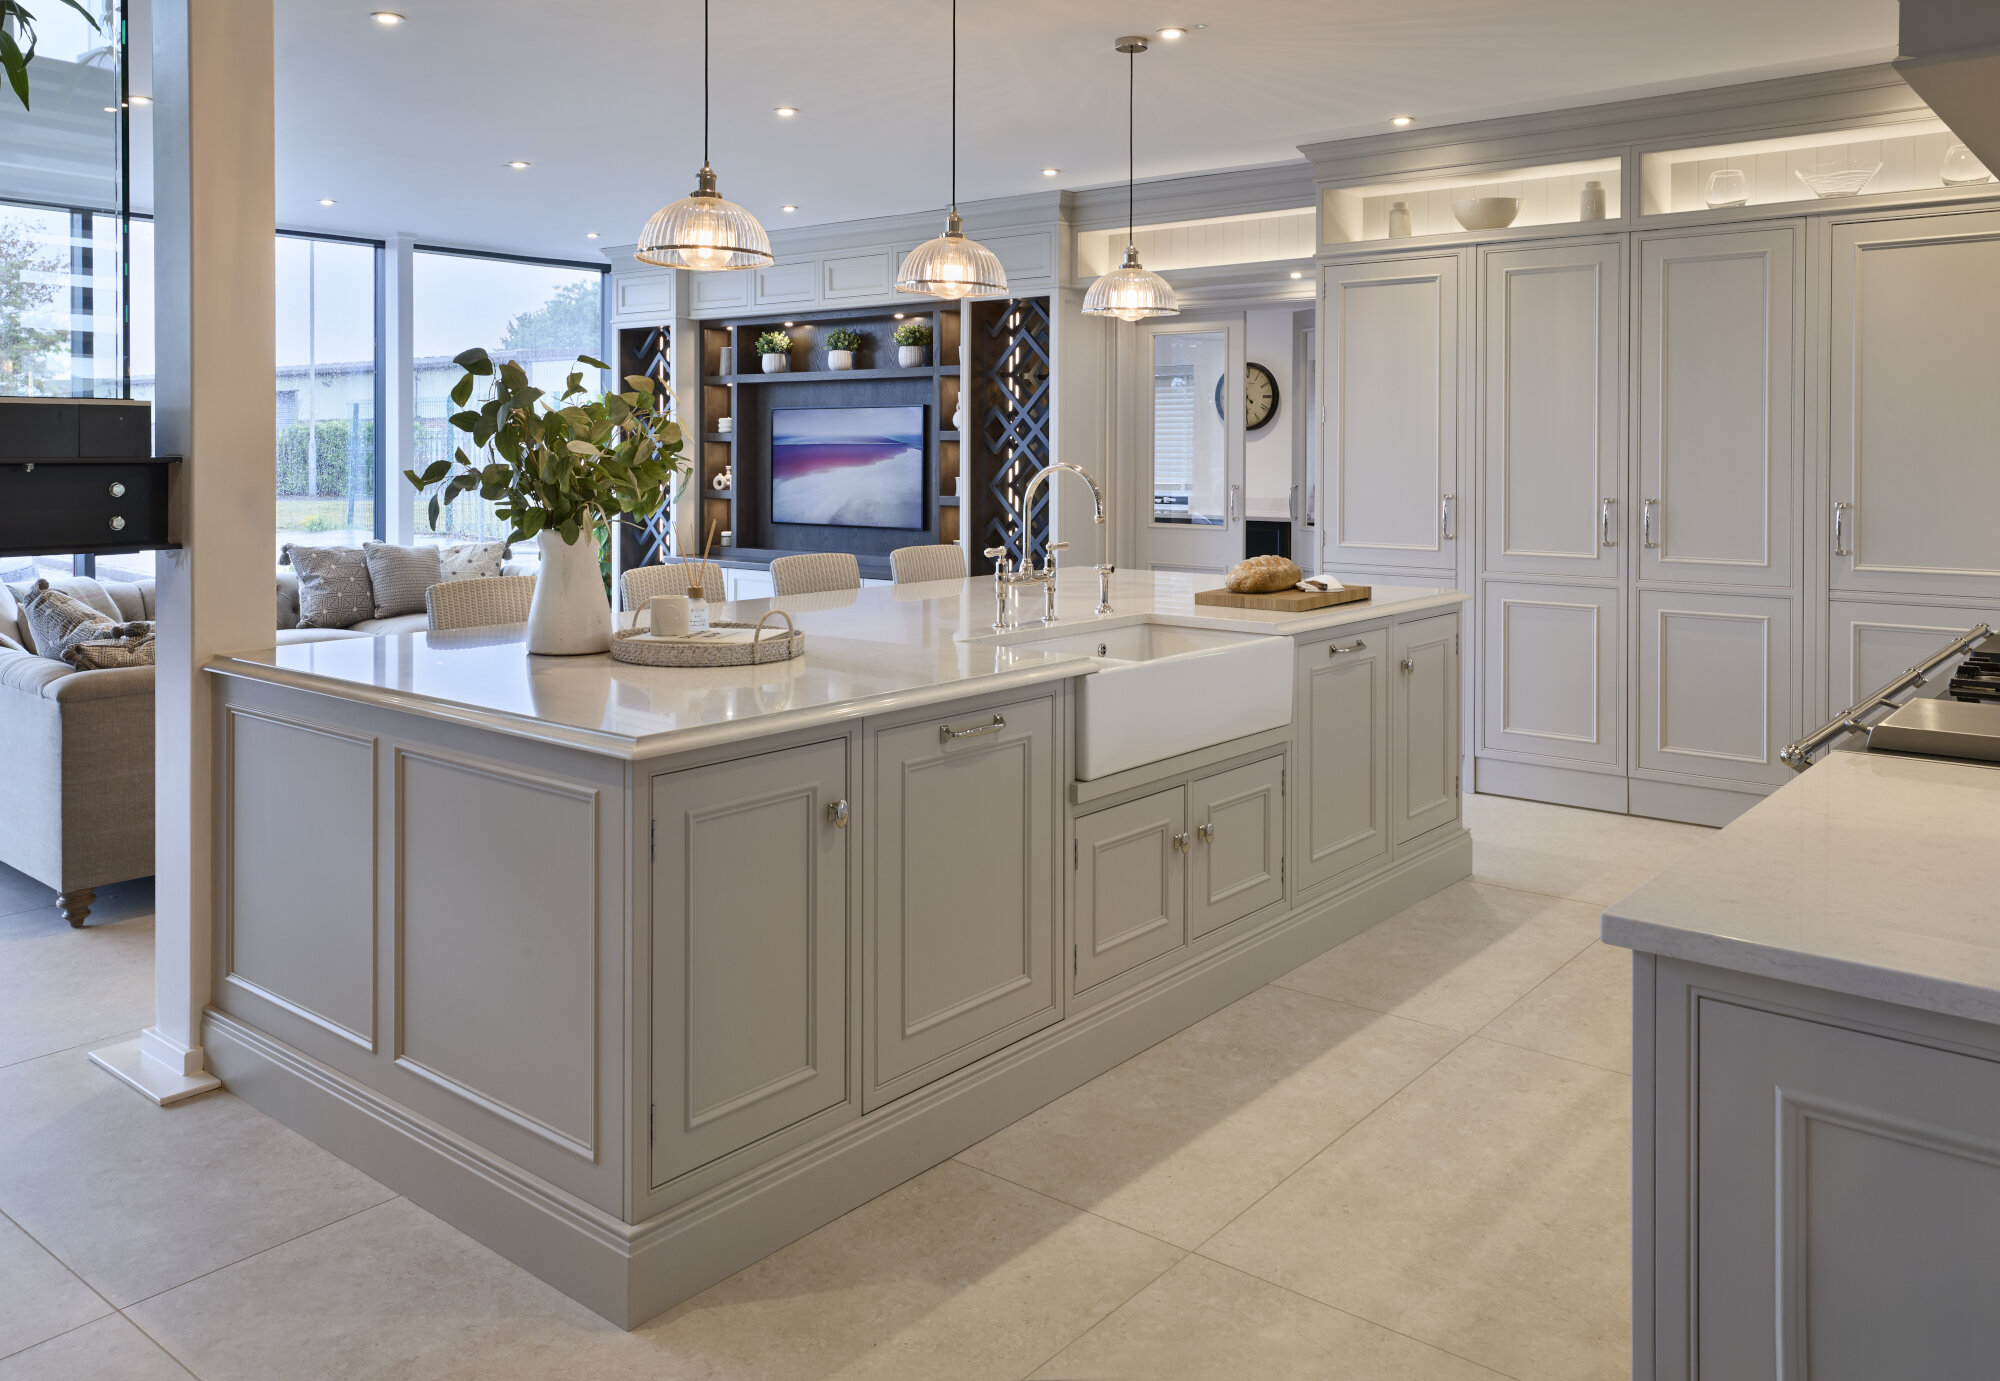 This Bespoke Kitchen Design is on display in our showroom near Kirton in Lindsey